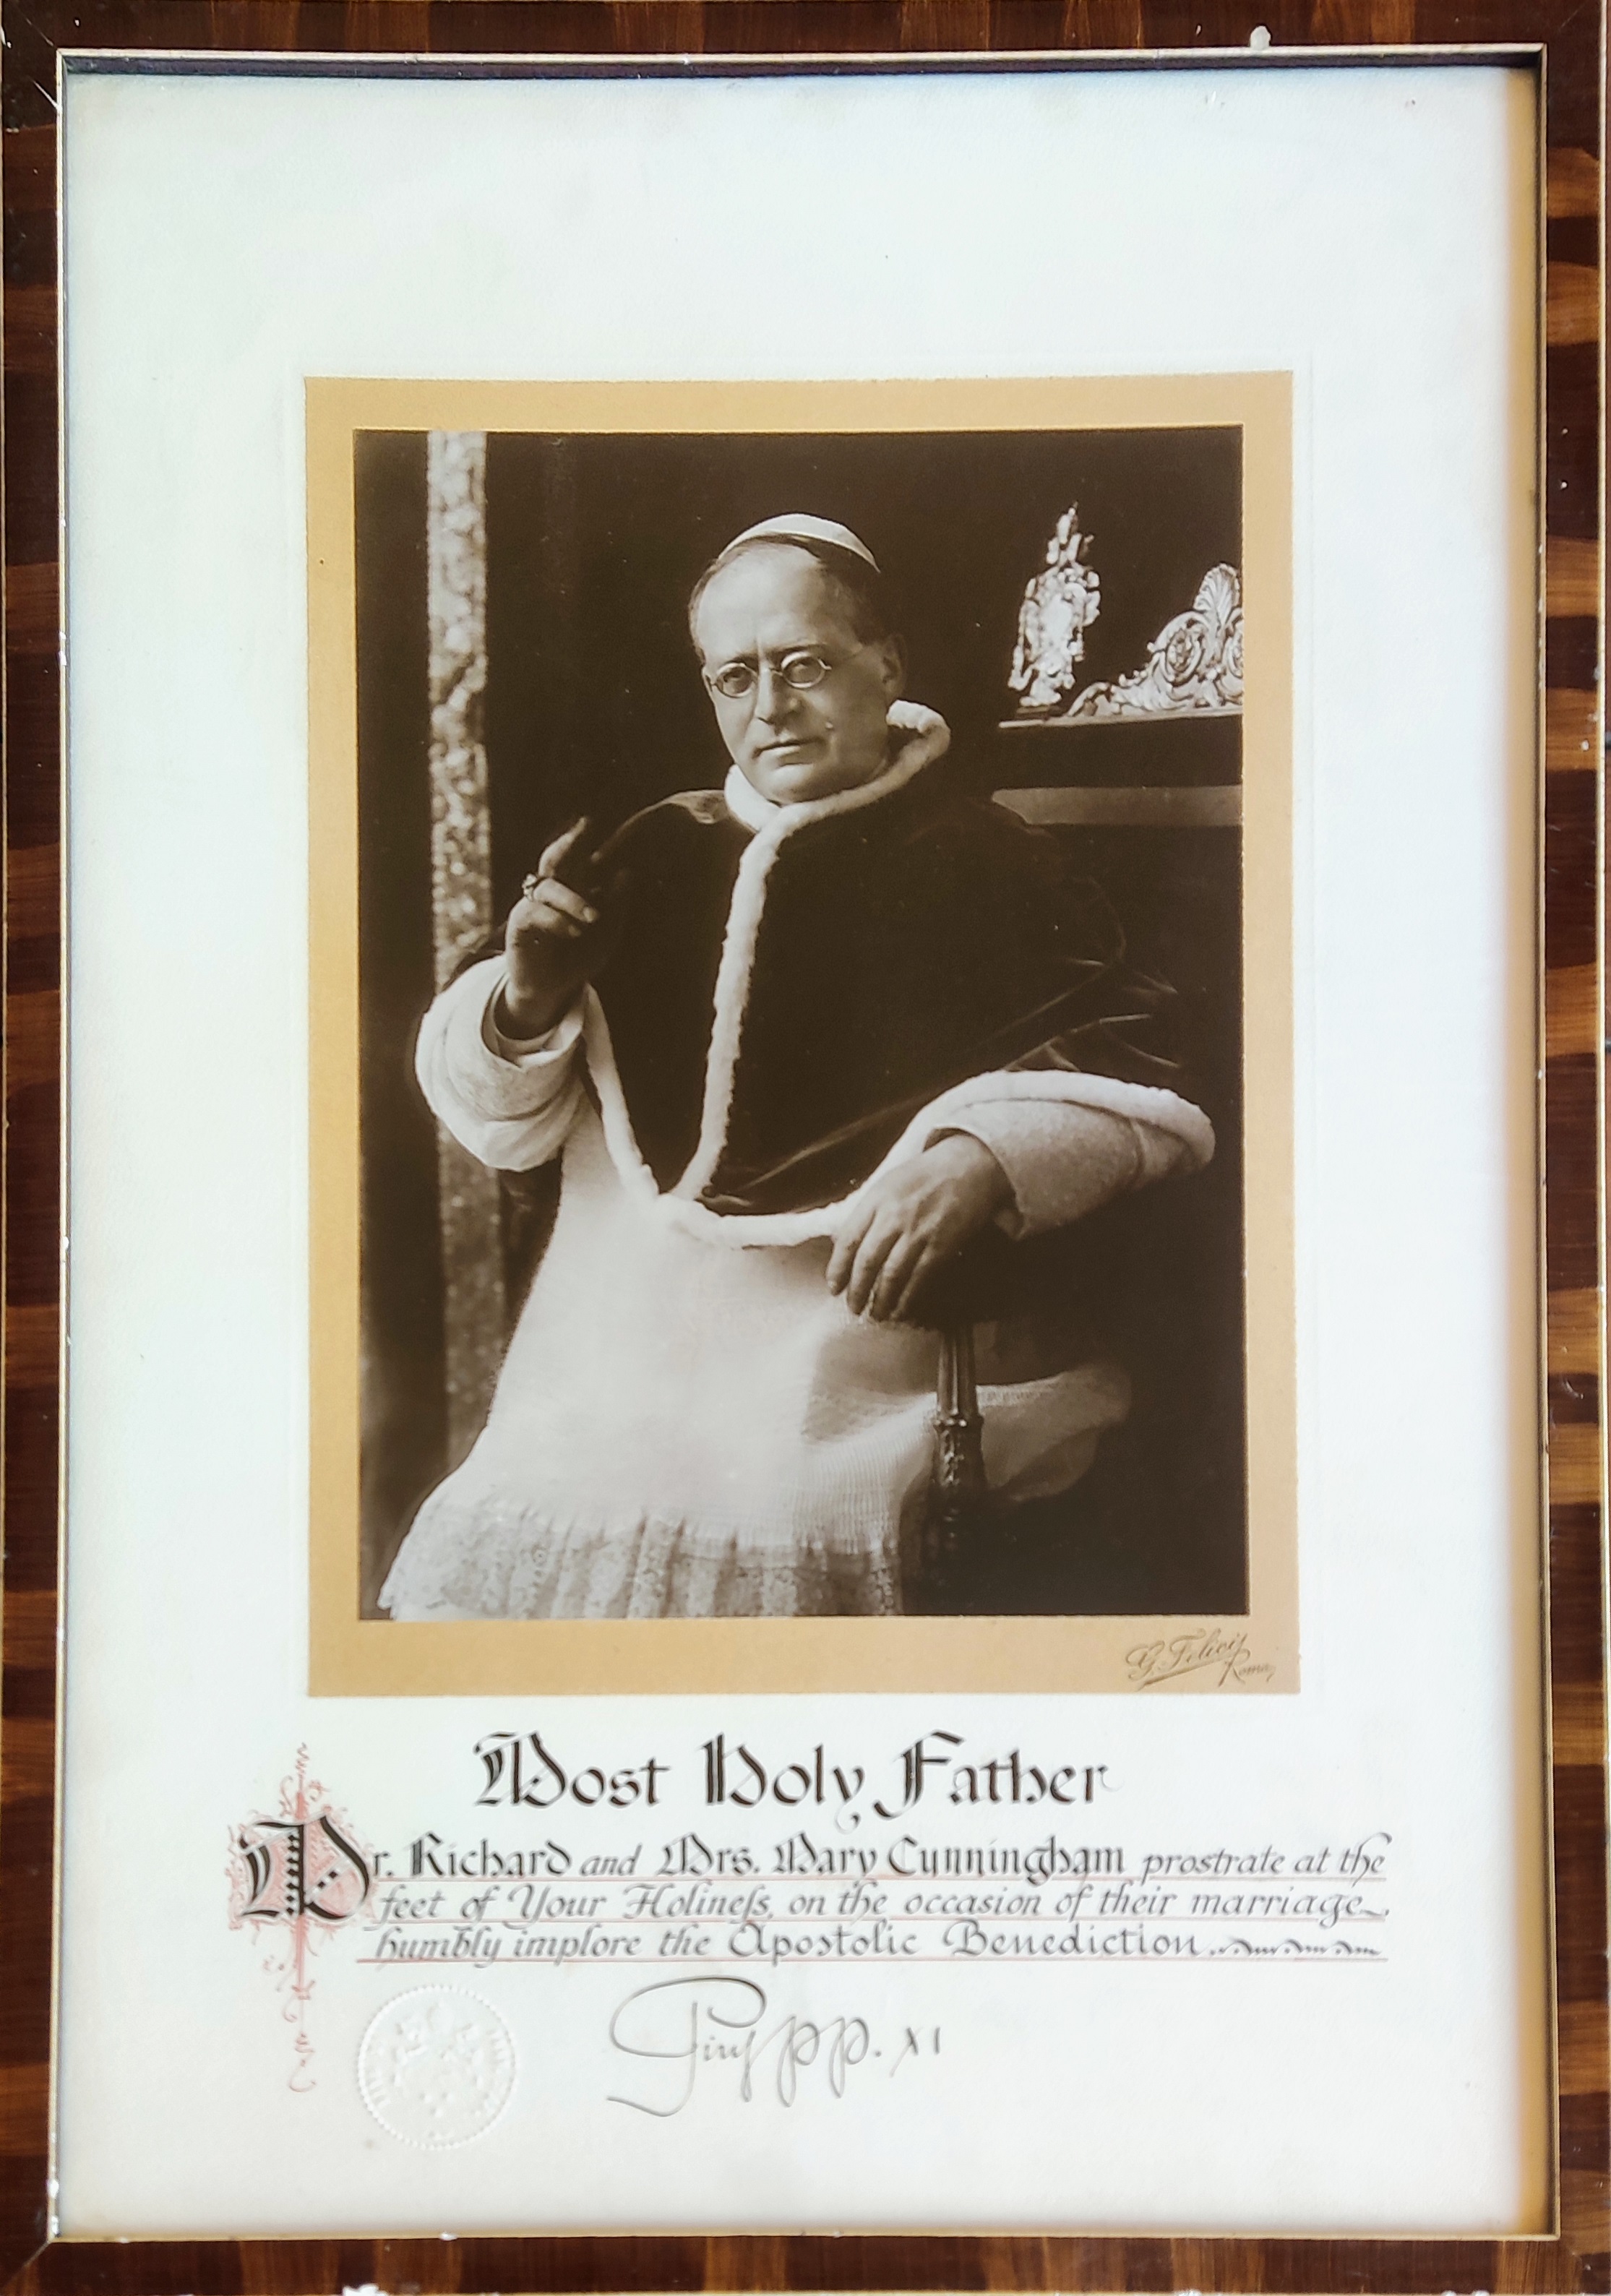 PIUS XI: (1857-1939) Pope of the Catholic Church 1922-39 and the first sovereign of Vatican City